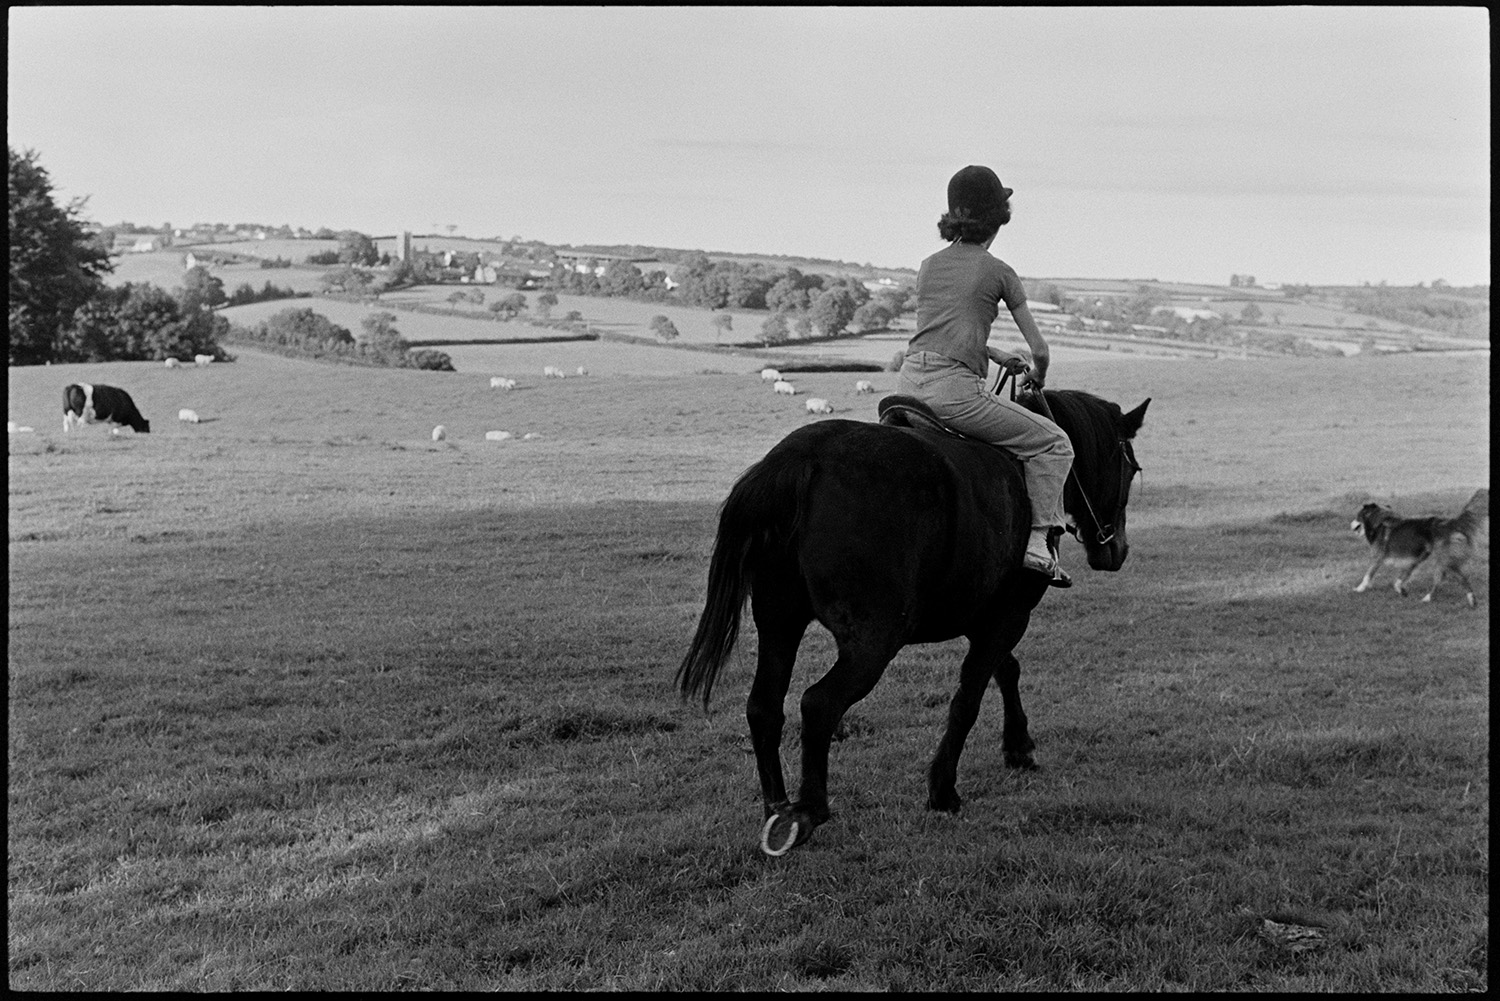 Pony in front of farmhouse and setting off.
[Elizabeth Ward riding her pony through a field at Parsonage, Iddesleigh. She is accompanied by a dog. Cattle and sheep can be seen grazing in the background and a village is visible in the distance.]